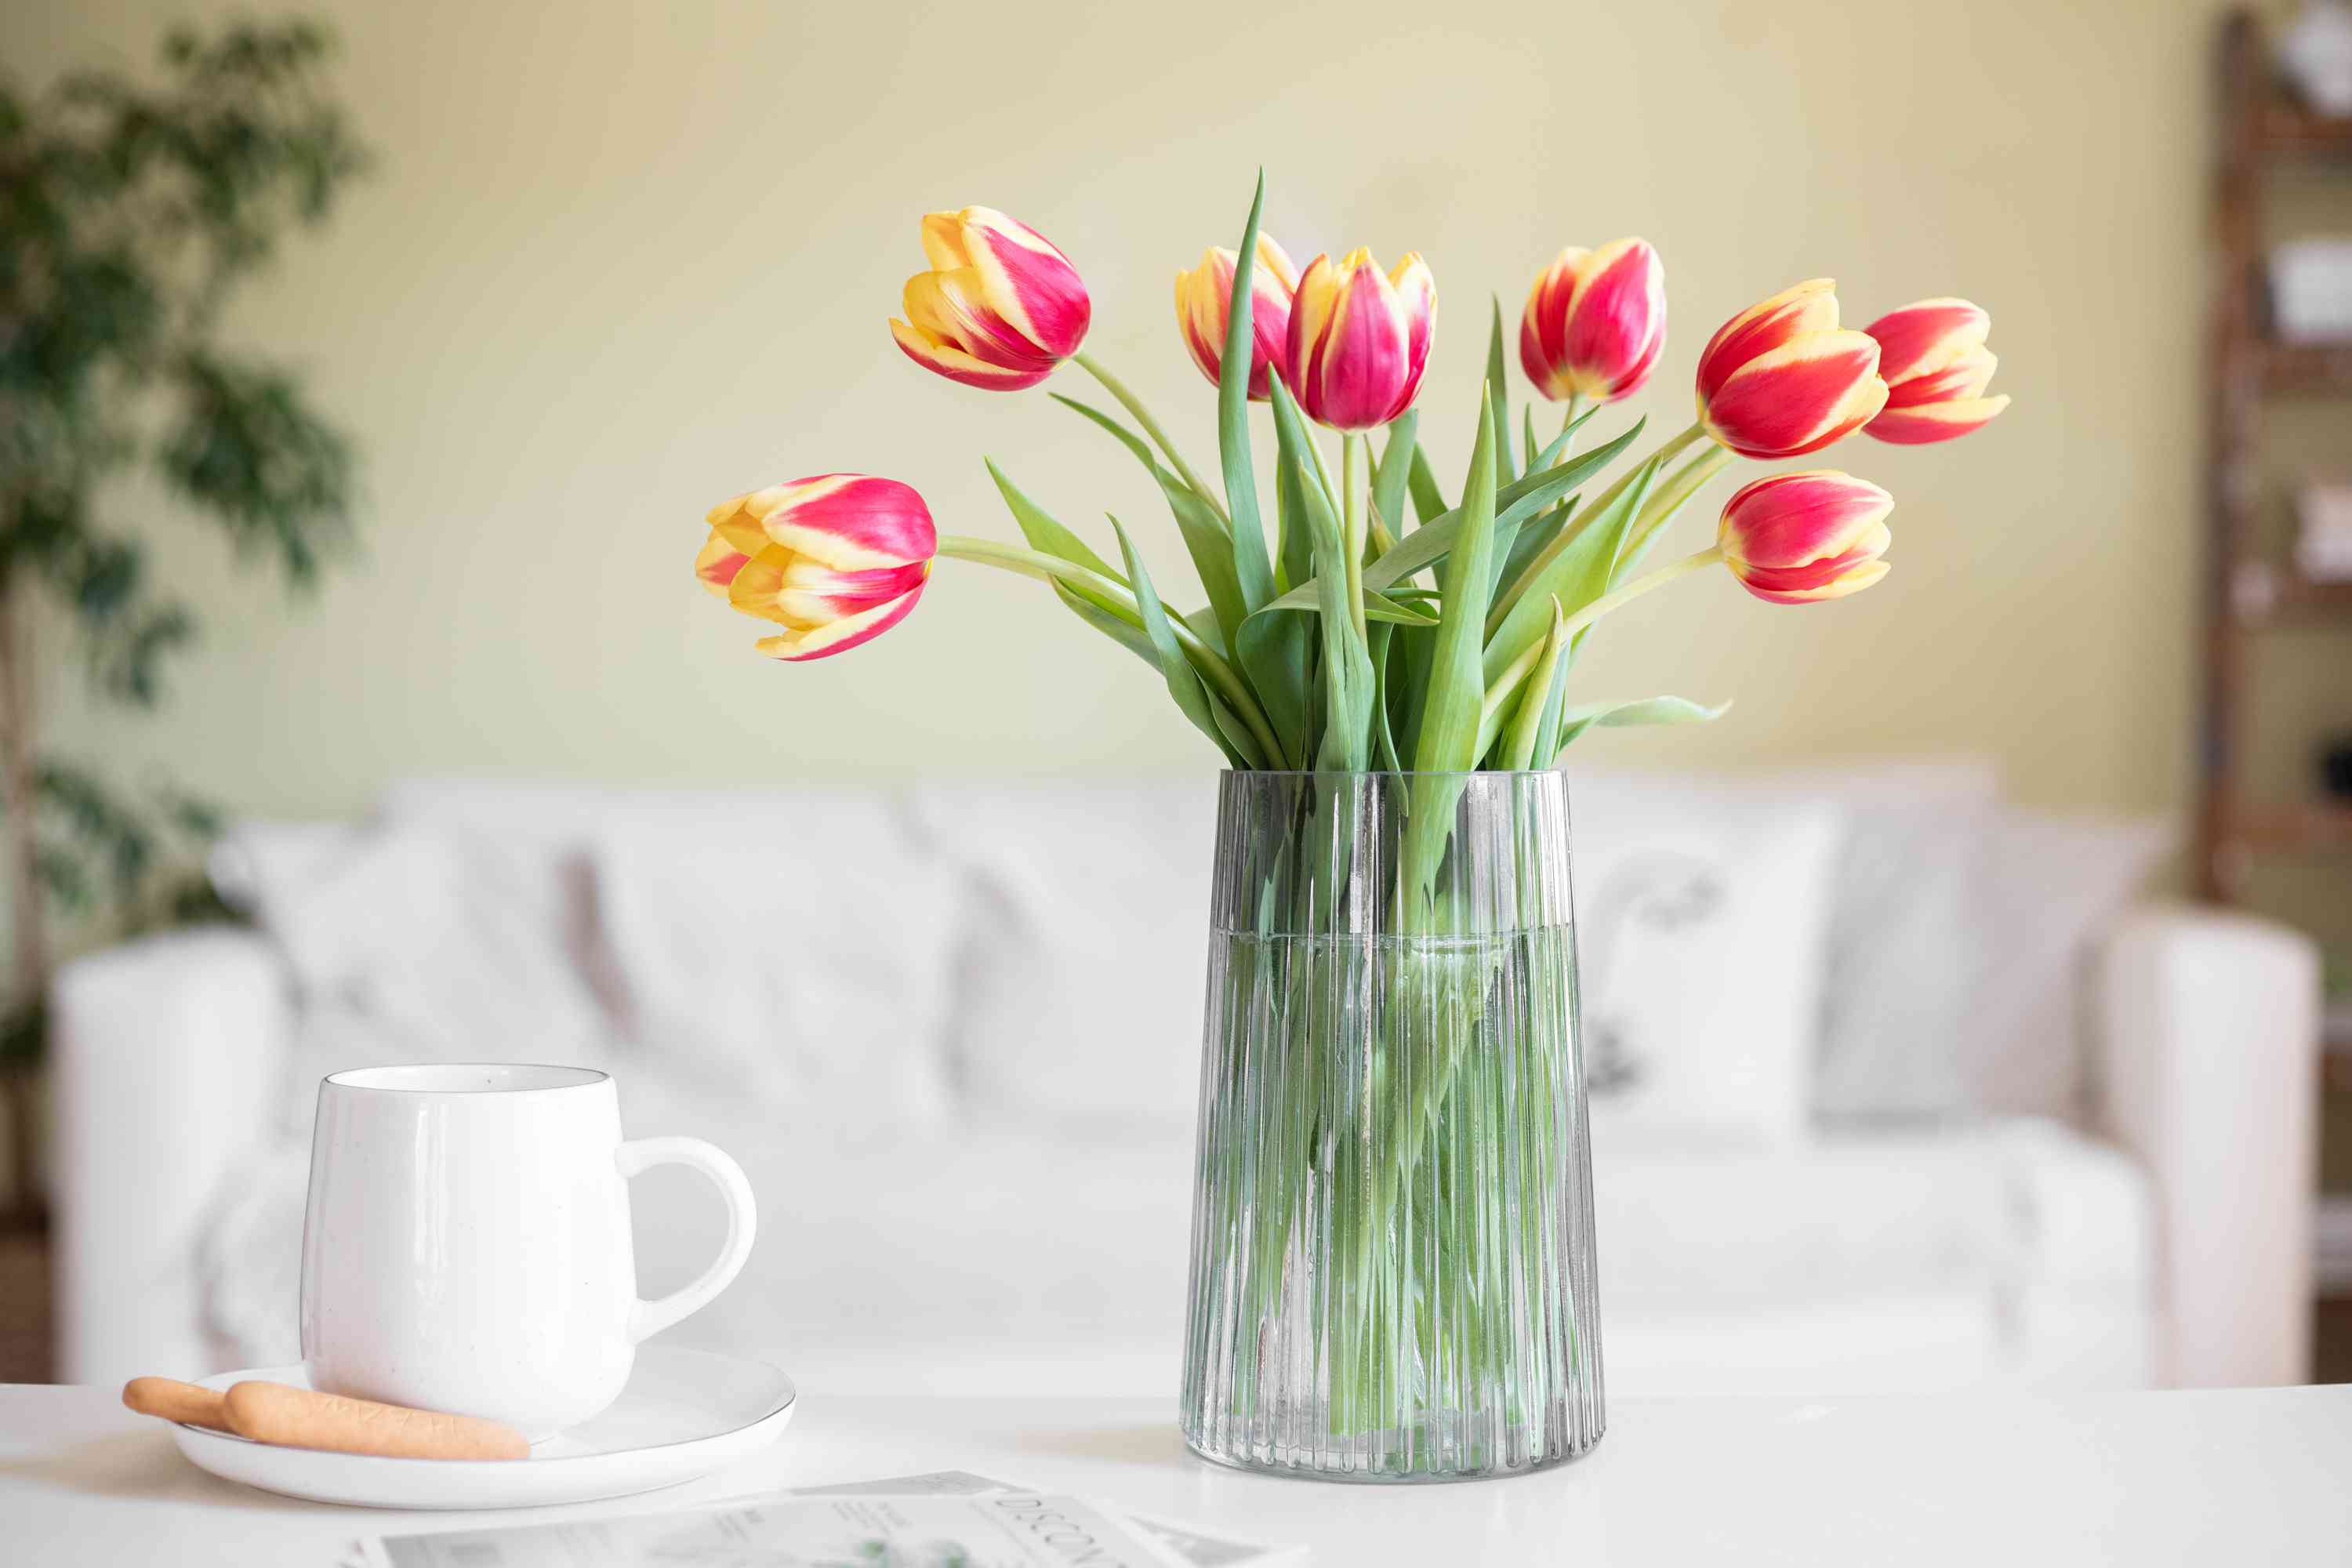 How To Care For Tulip Bulbs In A Vase